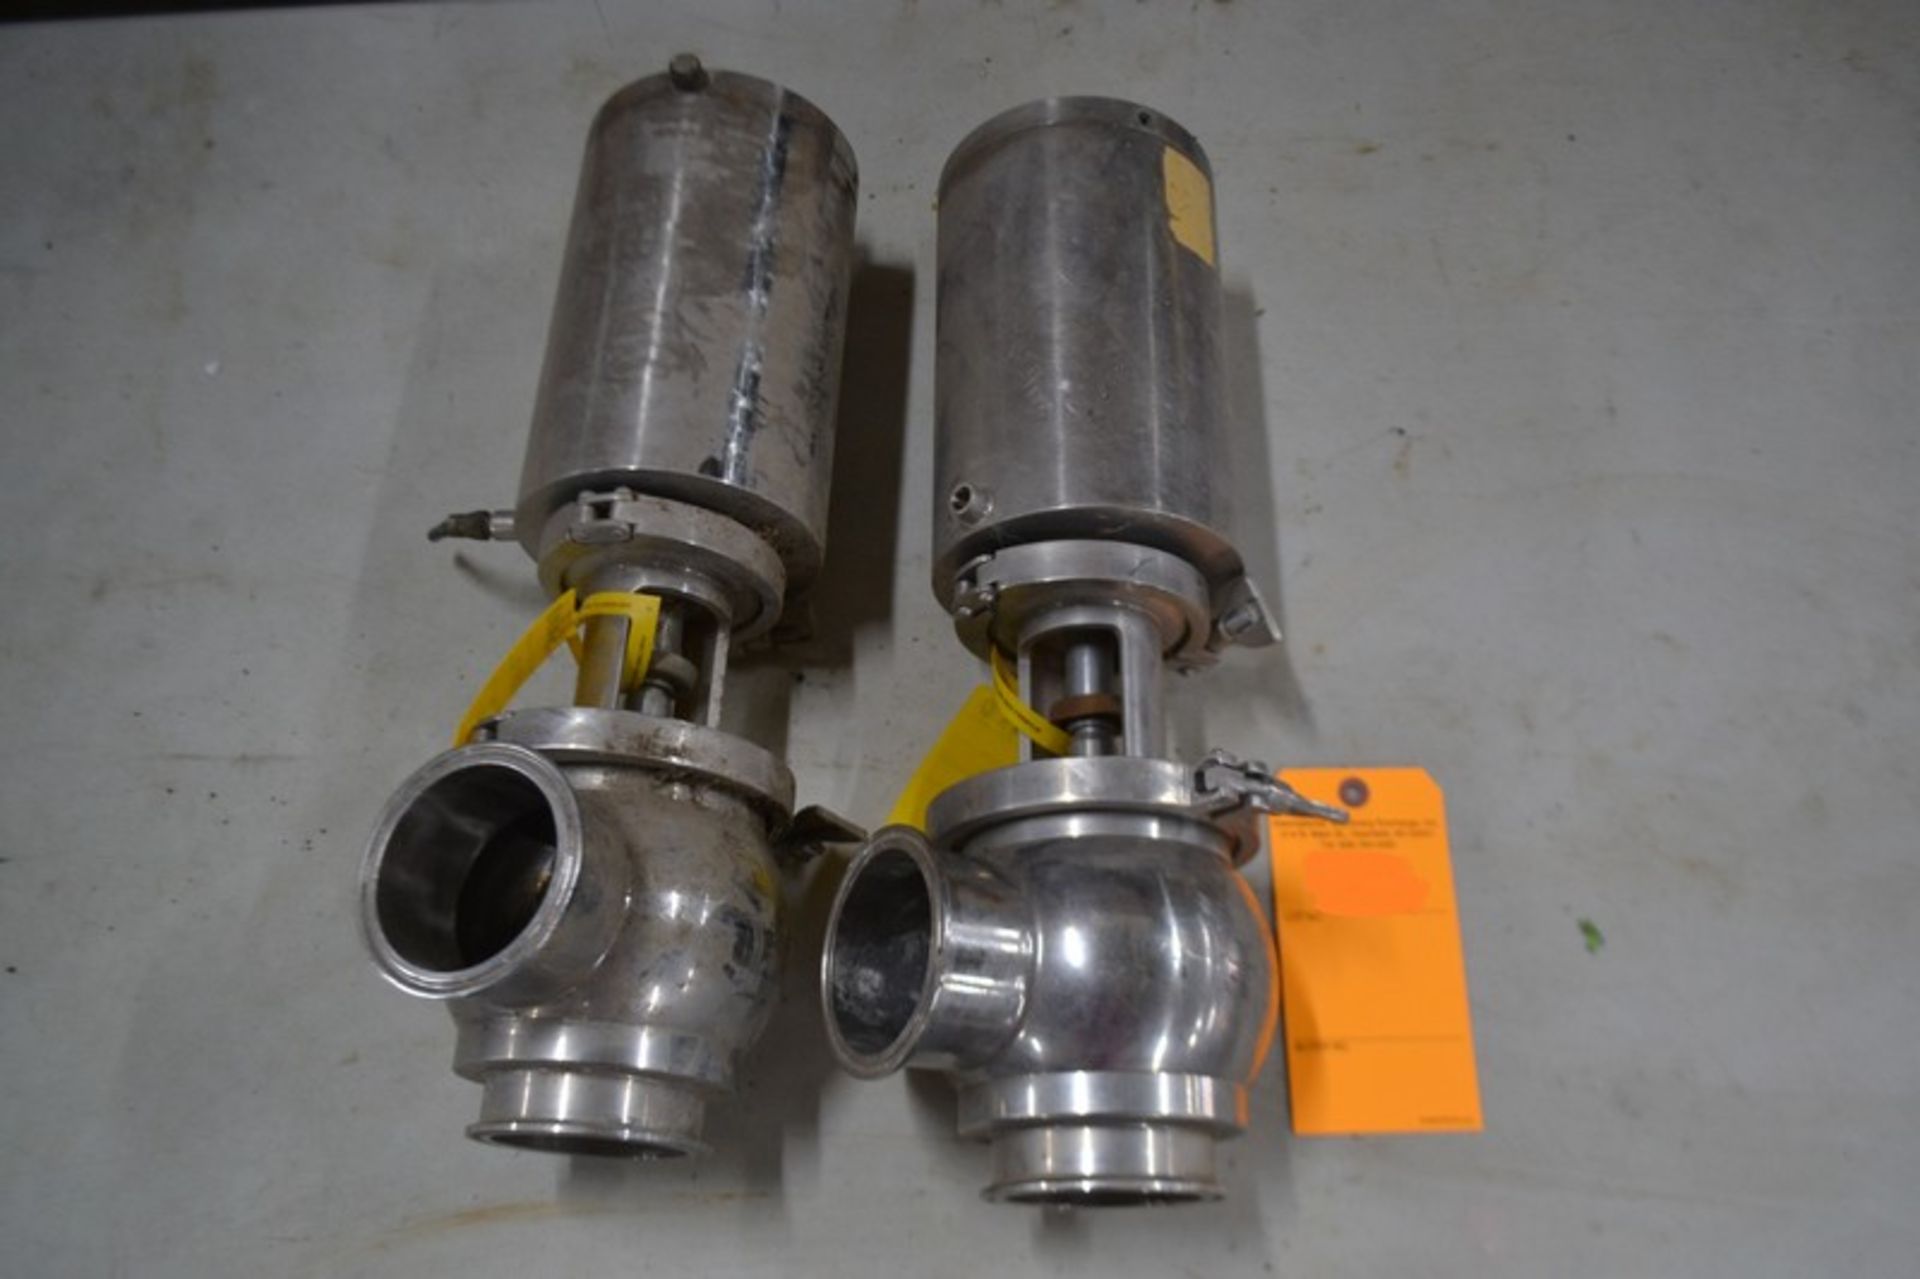 Lot of 2 Sudmo 3" S/S Stop Type Air Valves. Required Loading Fee For Simple Loading $20. (Located in